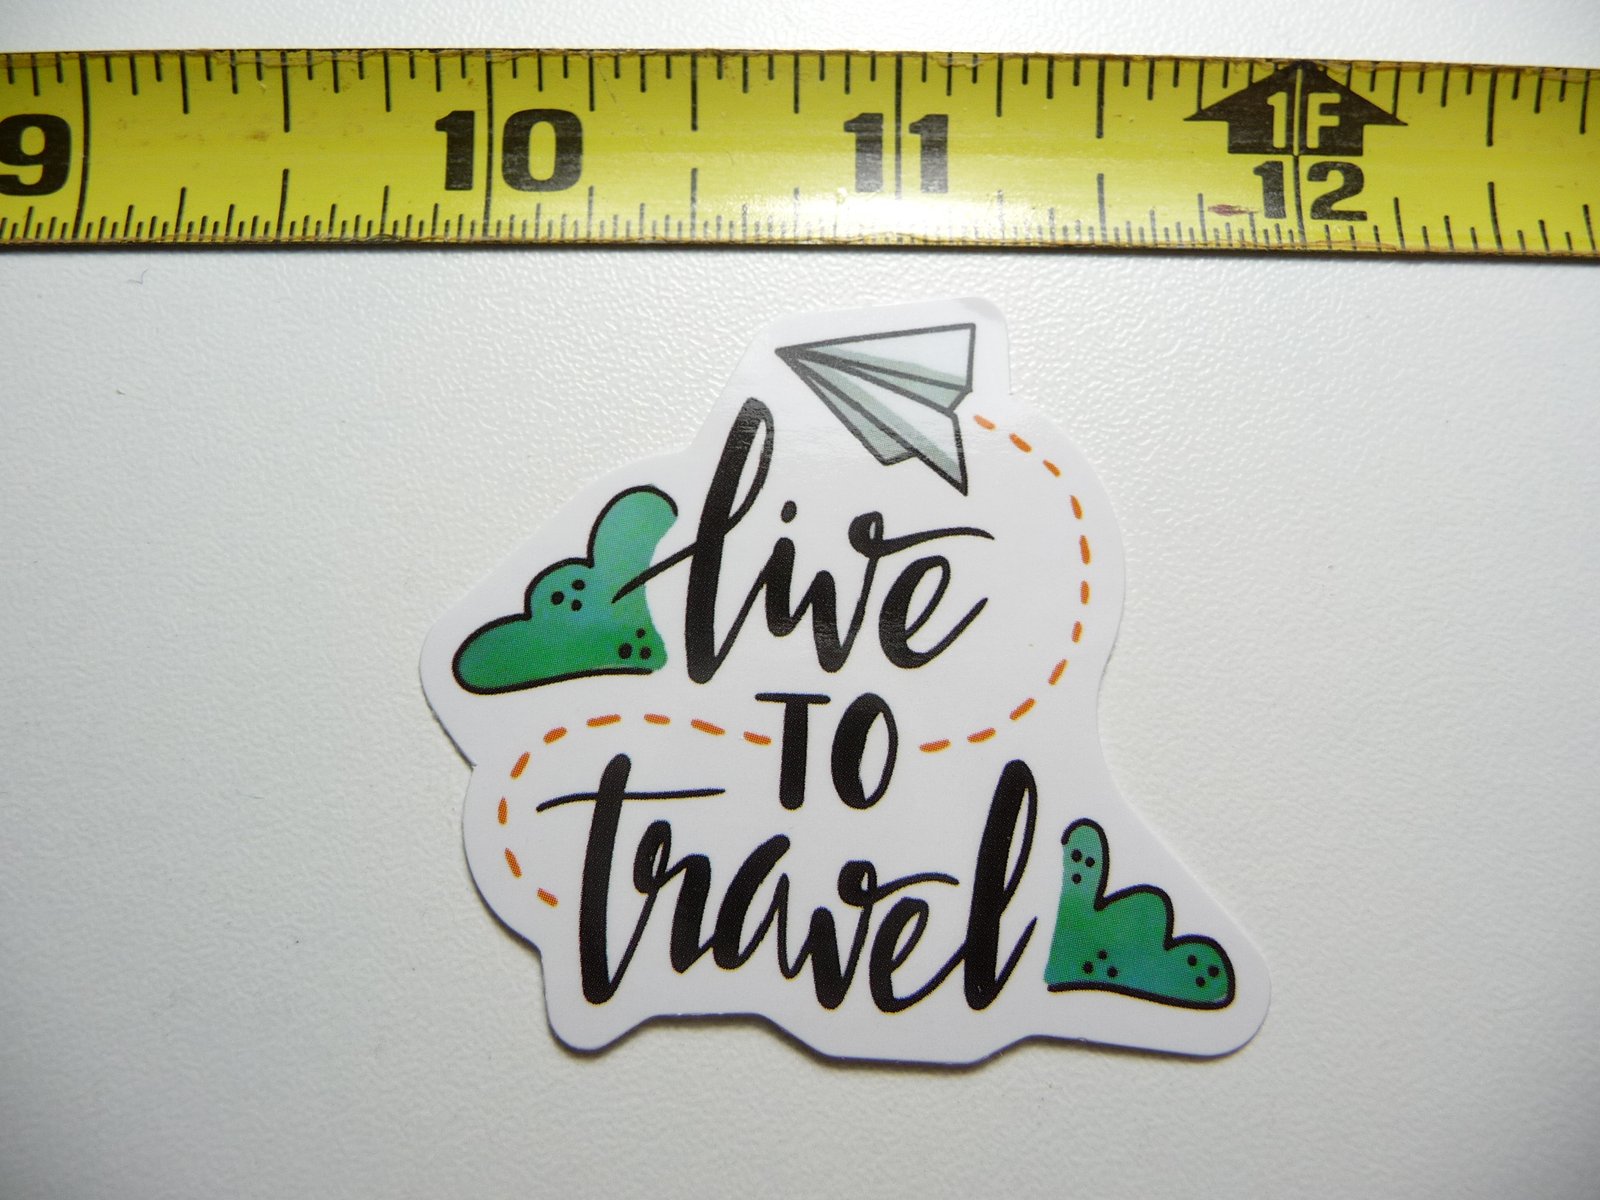 LIVE TO TRAVEL PAPER AIRPLANE DECAL STICKER GLOSSY MOTIVATIONAL POSITIVE - Afbeelding 1 van 1